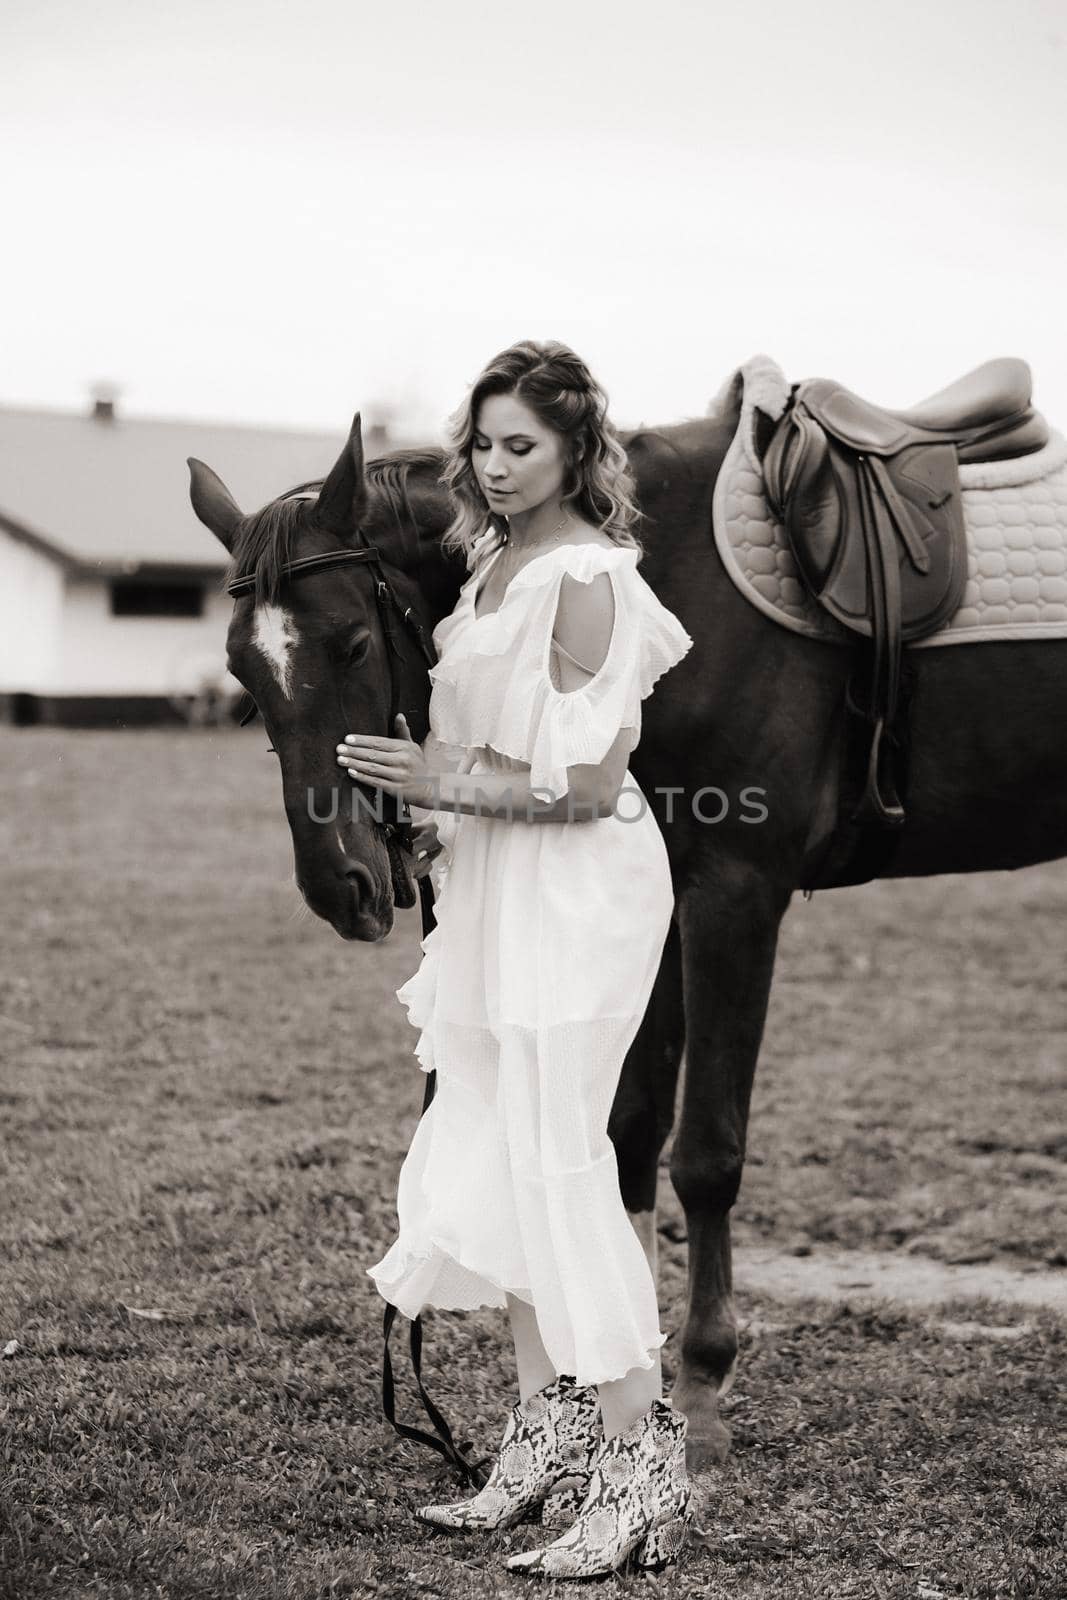 Beautiful girl in a white sundress next to a horse on an old ranch. black and white photo.